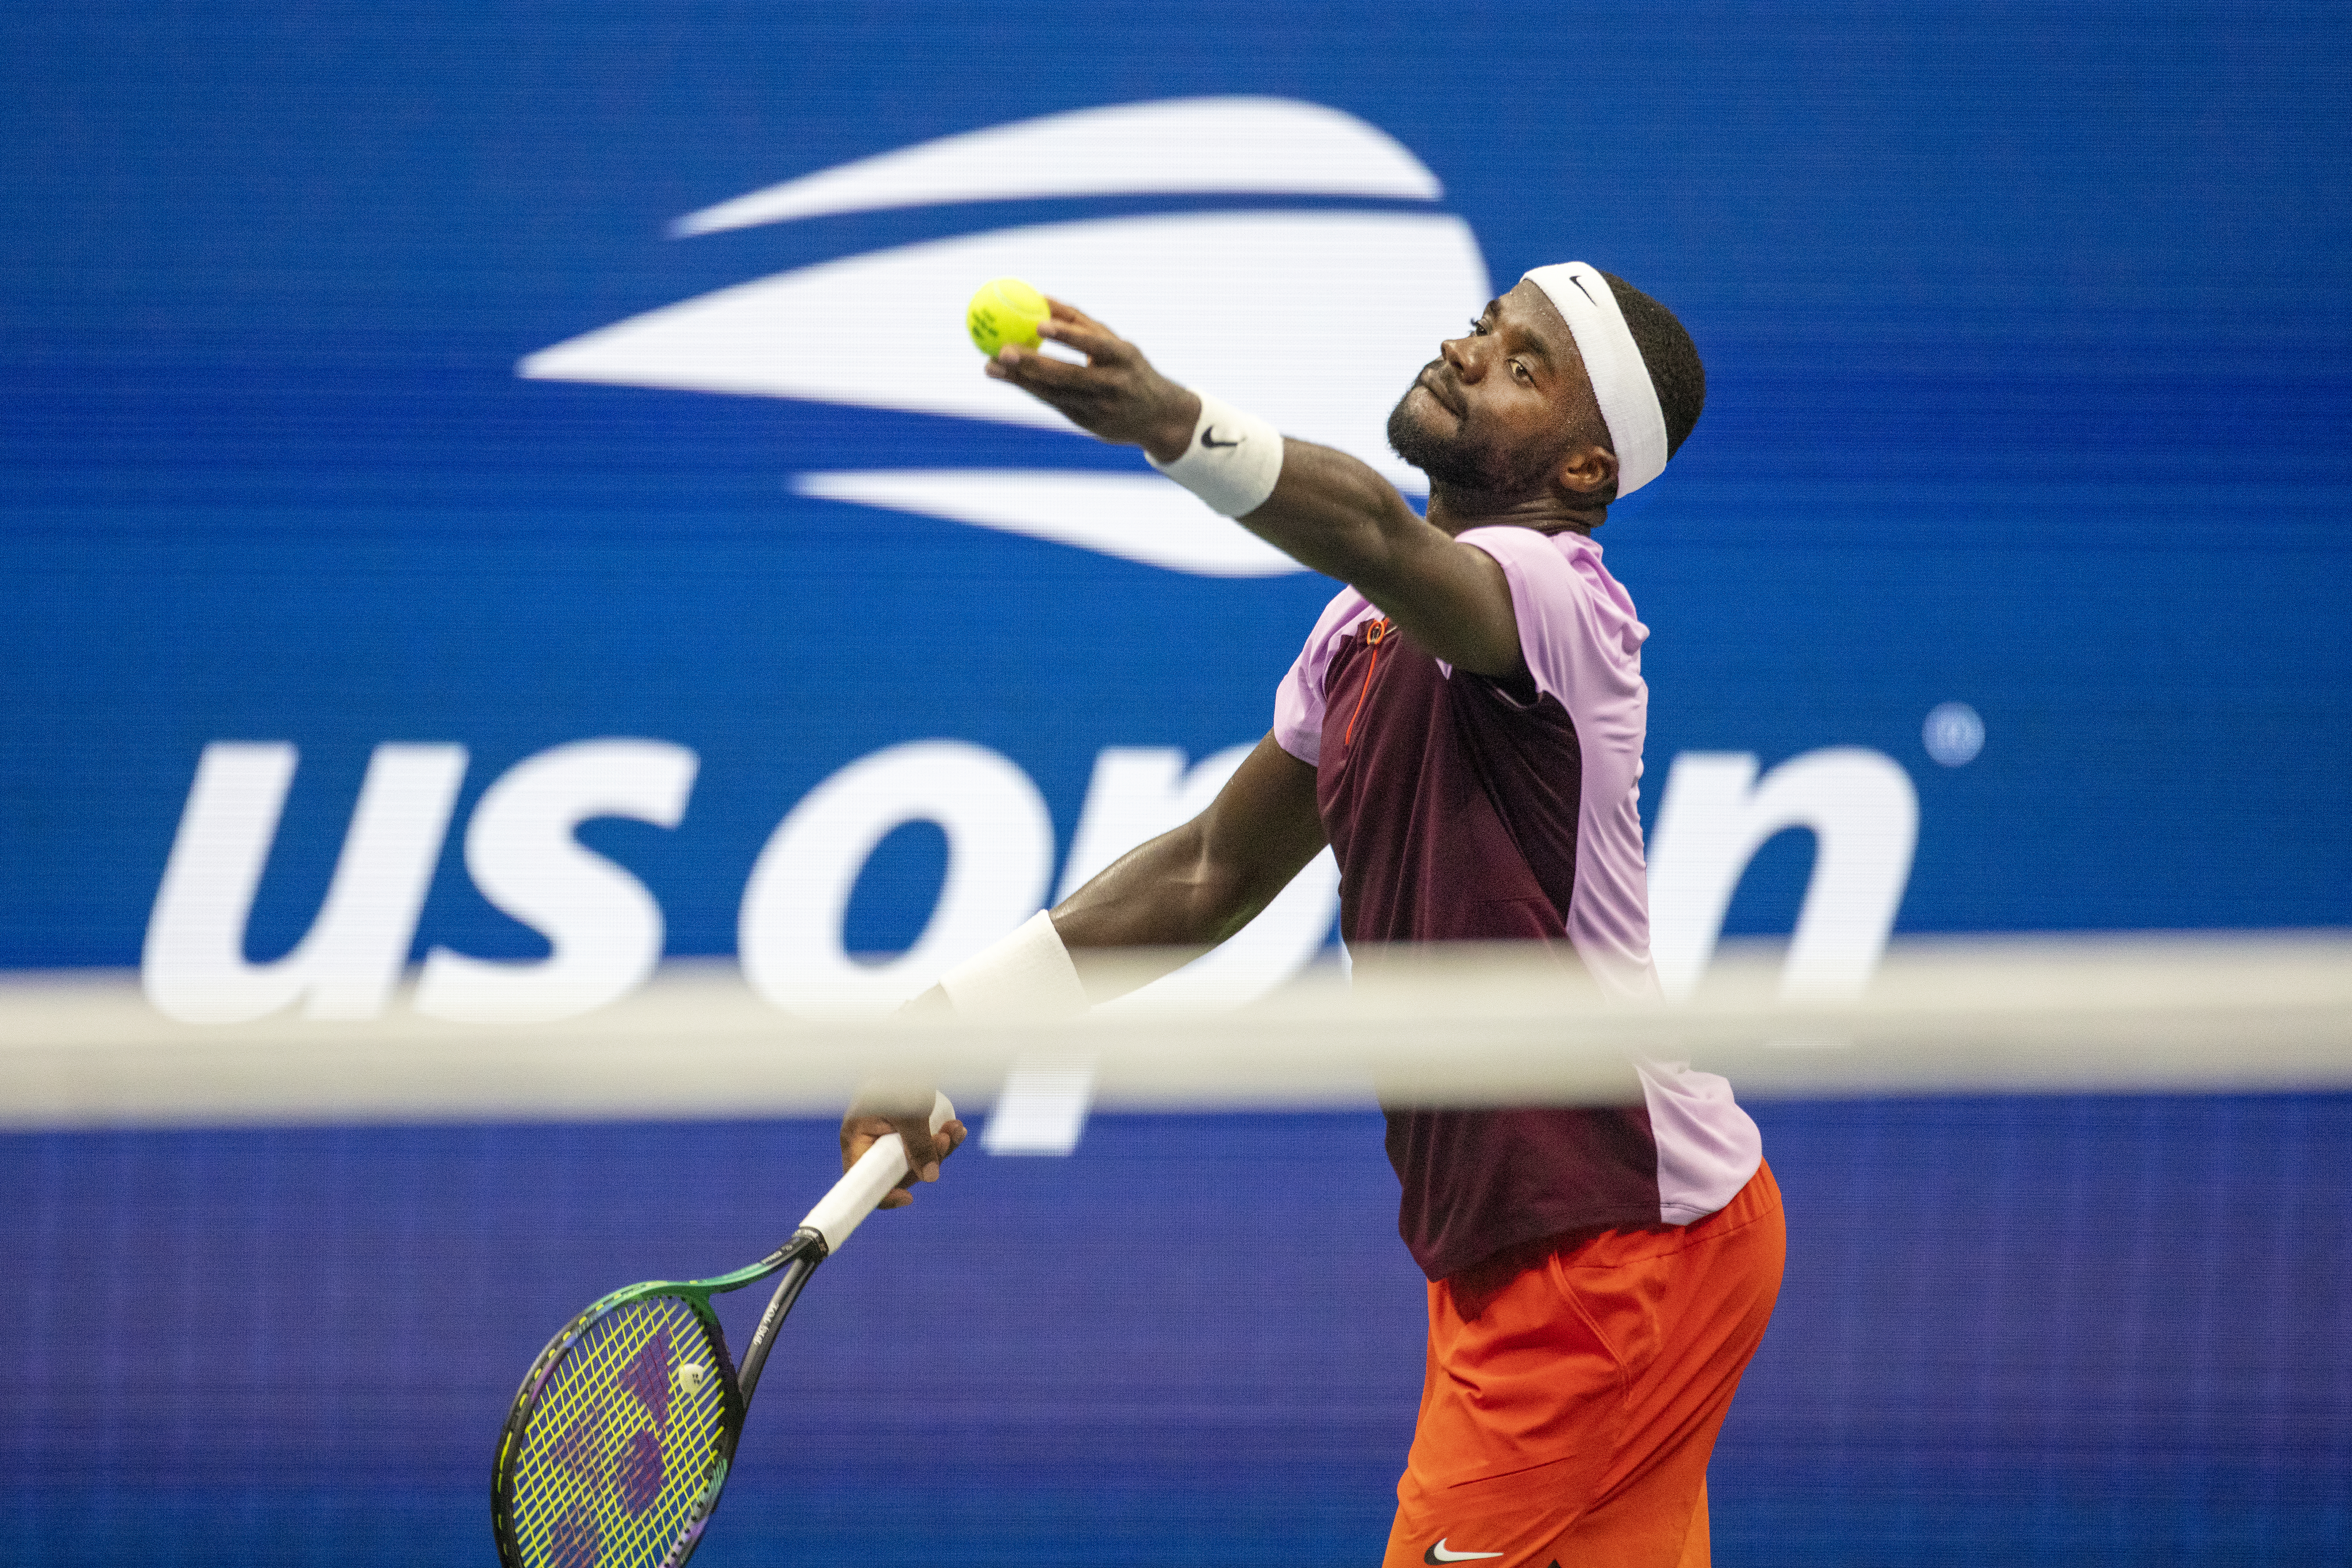 Frances Tiafoe of the United States in action during his match against Rafael Nadal of Spain in the Men’s Singles fourth round match on Arthur Ashe Stadium during the US Open Tennis Championship 2022 at the USTA National Tennis Centre on September 5th 2022 in Flushing, Queens, New York City.